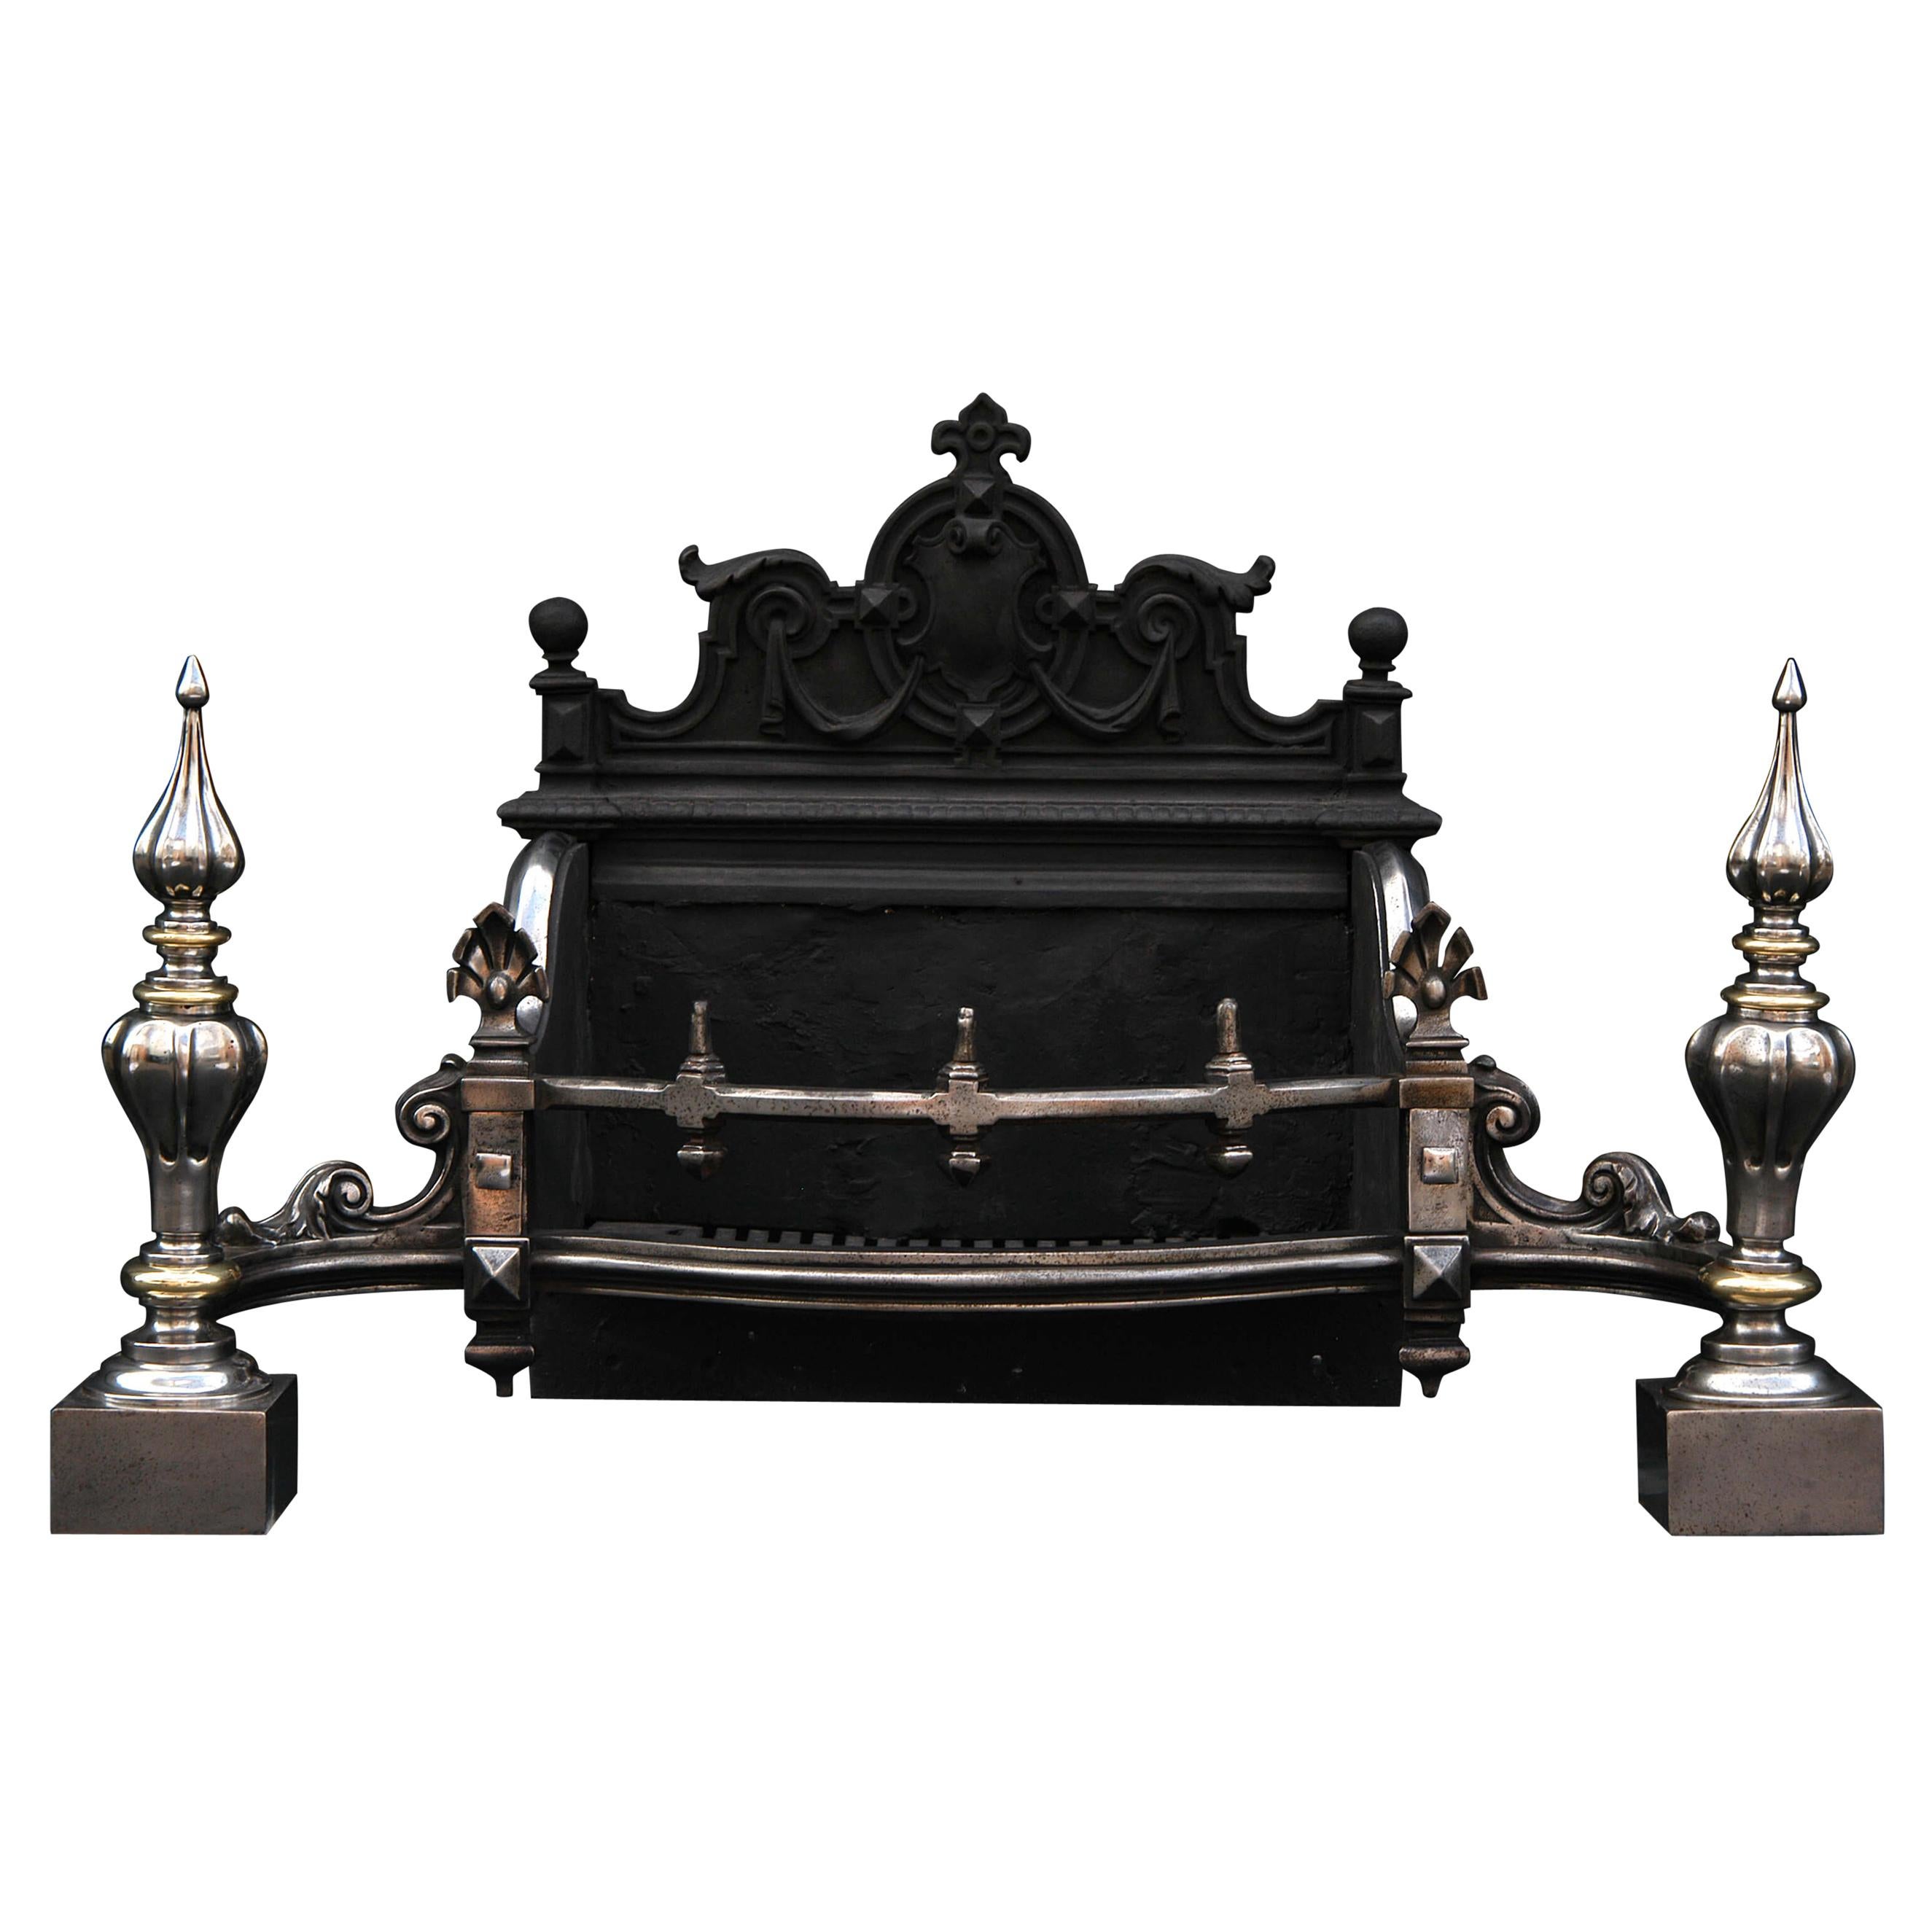 19th Century English Gothic Revival Firegrate For Sale